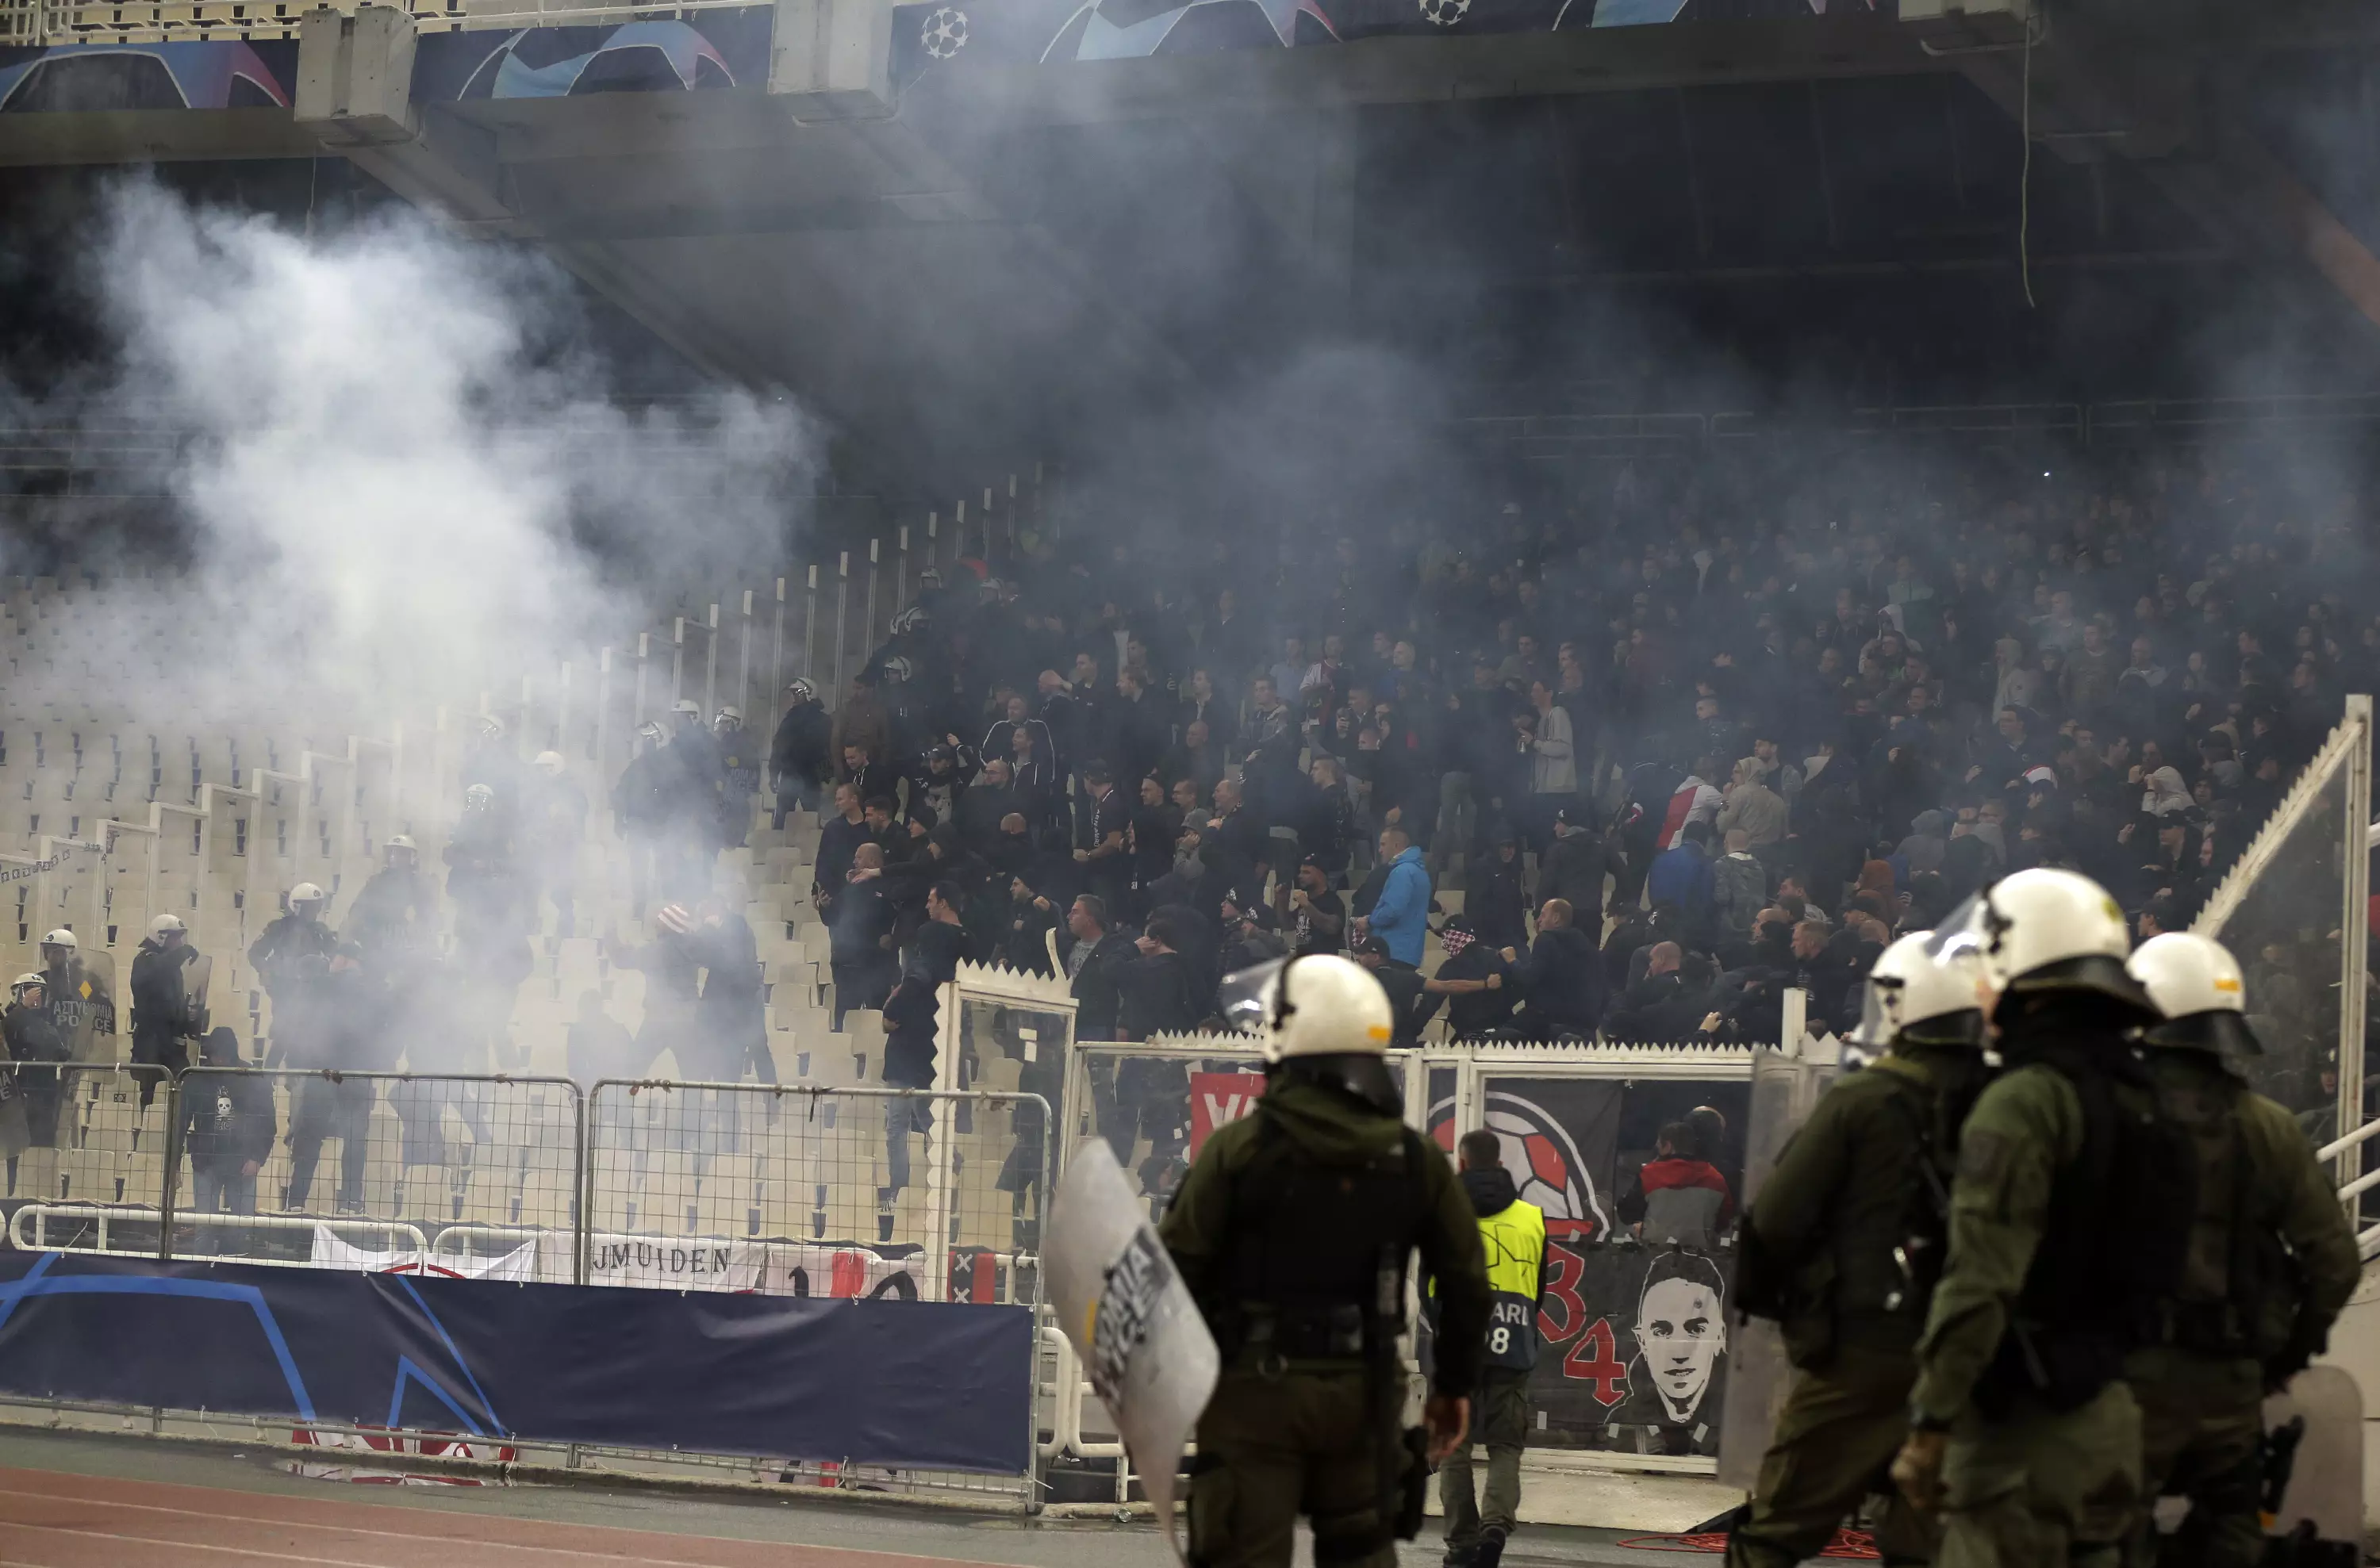 The stadium erupted into violence ahead of tonight's game.